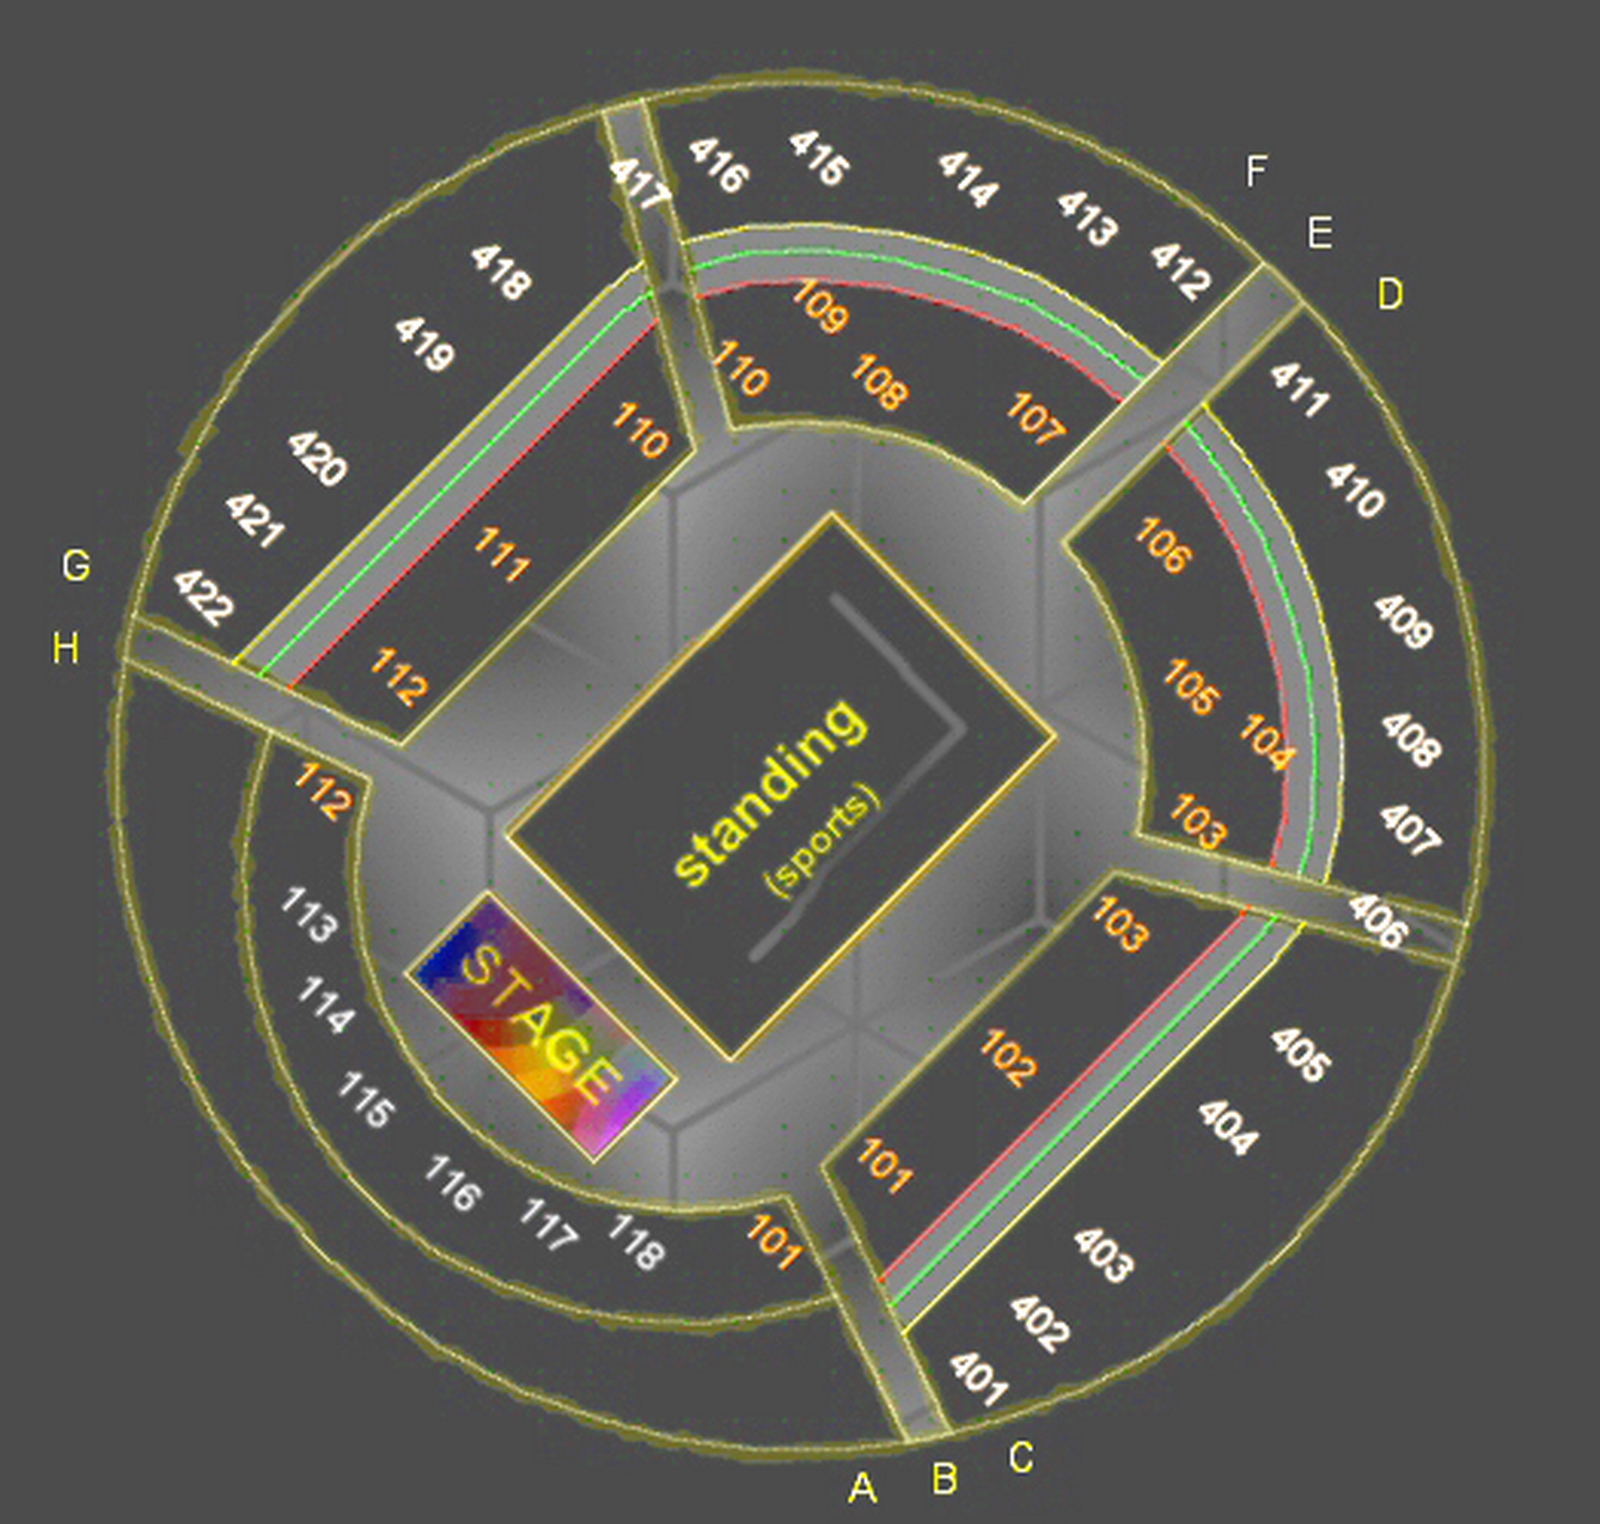 The O2 Arena London seating plan Entrance map showing gates A B C D E F G H